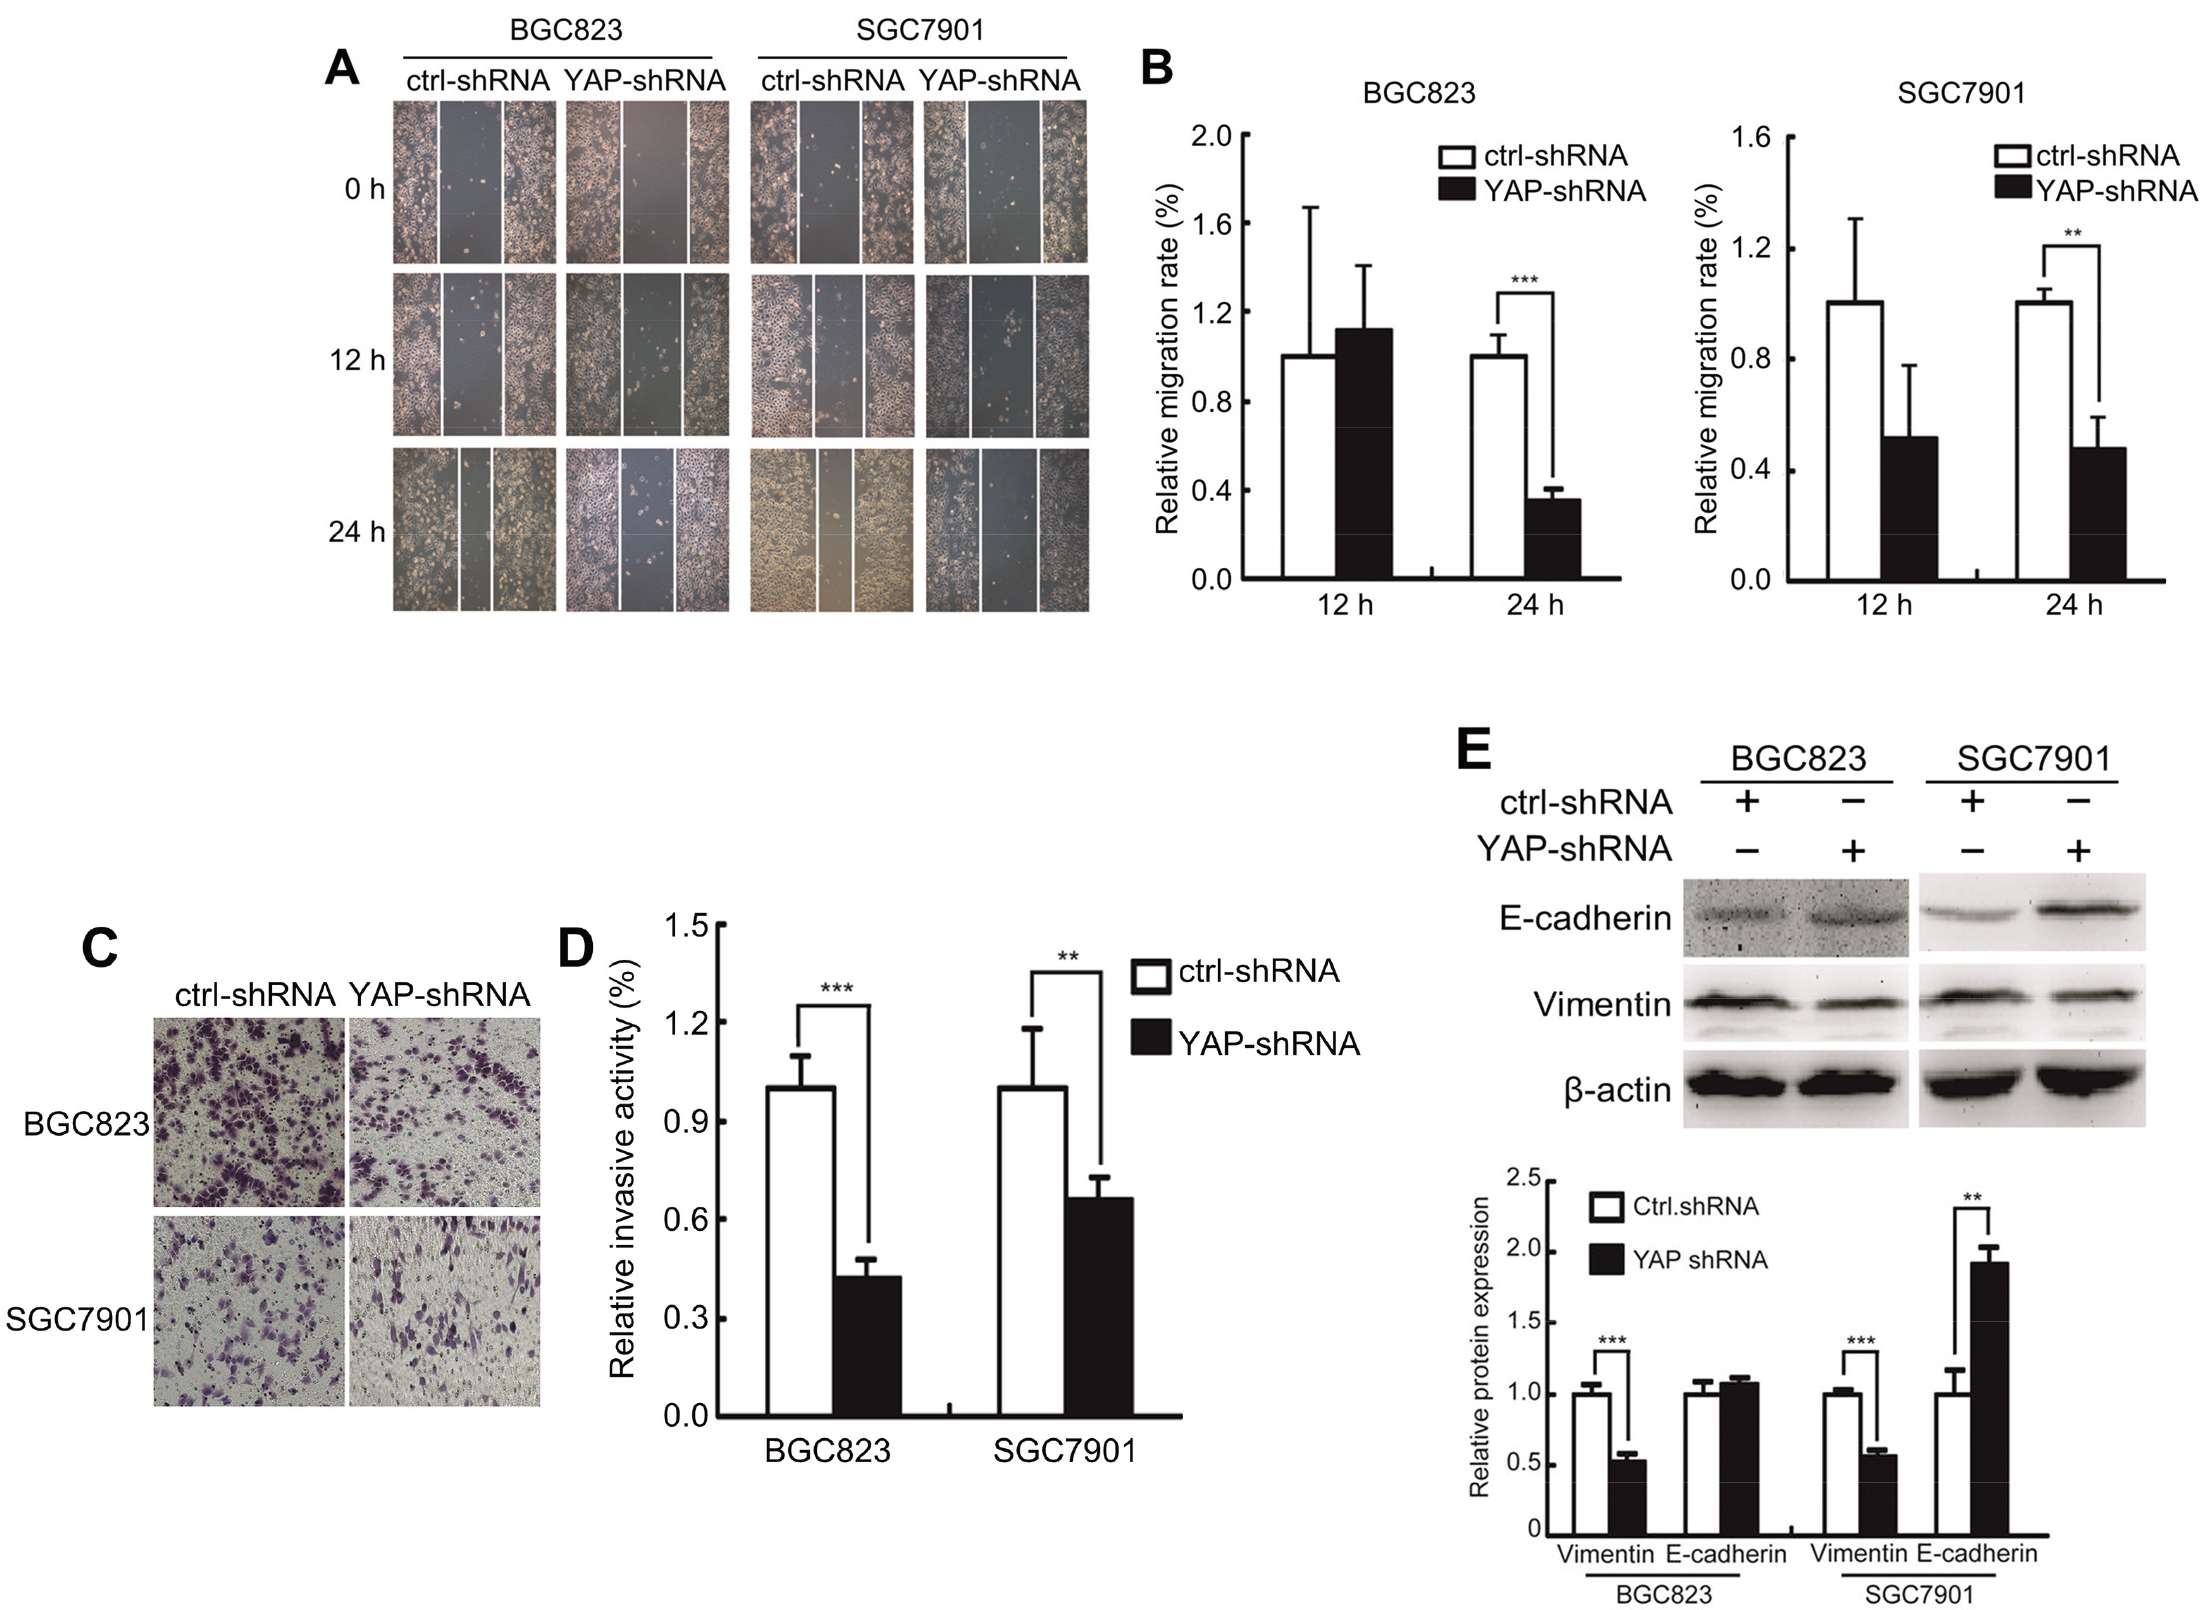 YAP1 enhances the metastatic capacity of GC cells in vitro. (A) Migration capabilities of SGC7901 and BGC823 cells assessed by scratch wound assay. (B) Relative migration rate of SGC7901 and BGC823 cells assessed by scratch wound assay. (C) Invasion assay of SGC7901 and BGC823 cells transfected with shRNA control and YAP-shRNA. (D) Relative invasion activity of SGC7901 and BGC823 cells transfected with shRNA control and YAP-shRNA. (E) Expression of E-cadherin and vimentin of SGC7901 and BGC823 cells transfected with shRNA control and YAP-shRNA detected by Western blot. P*< 0.05, P**< 0.01, P*⁣**< 0.001. 